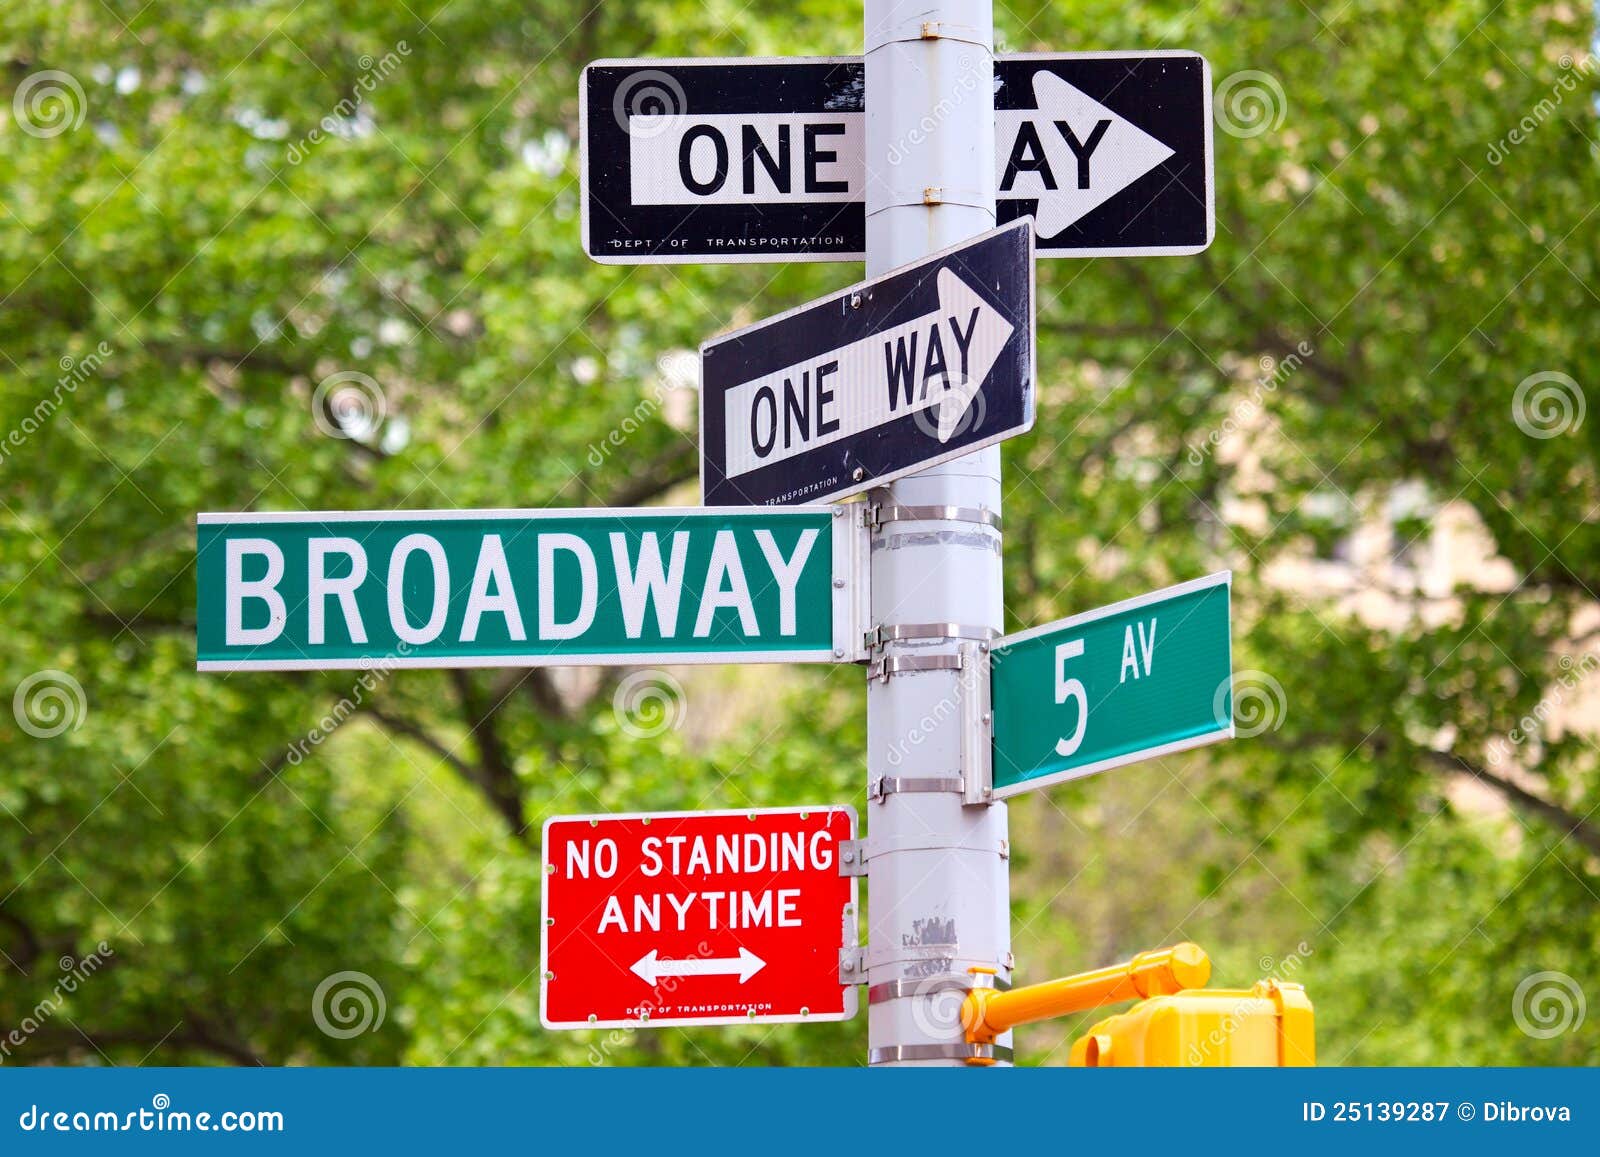 broadway, 5th avenue and one way street signs